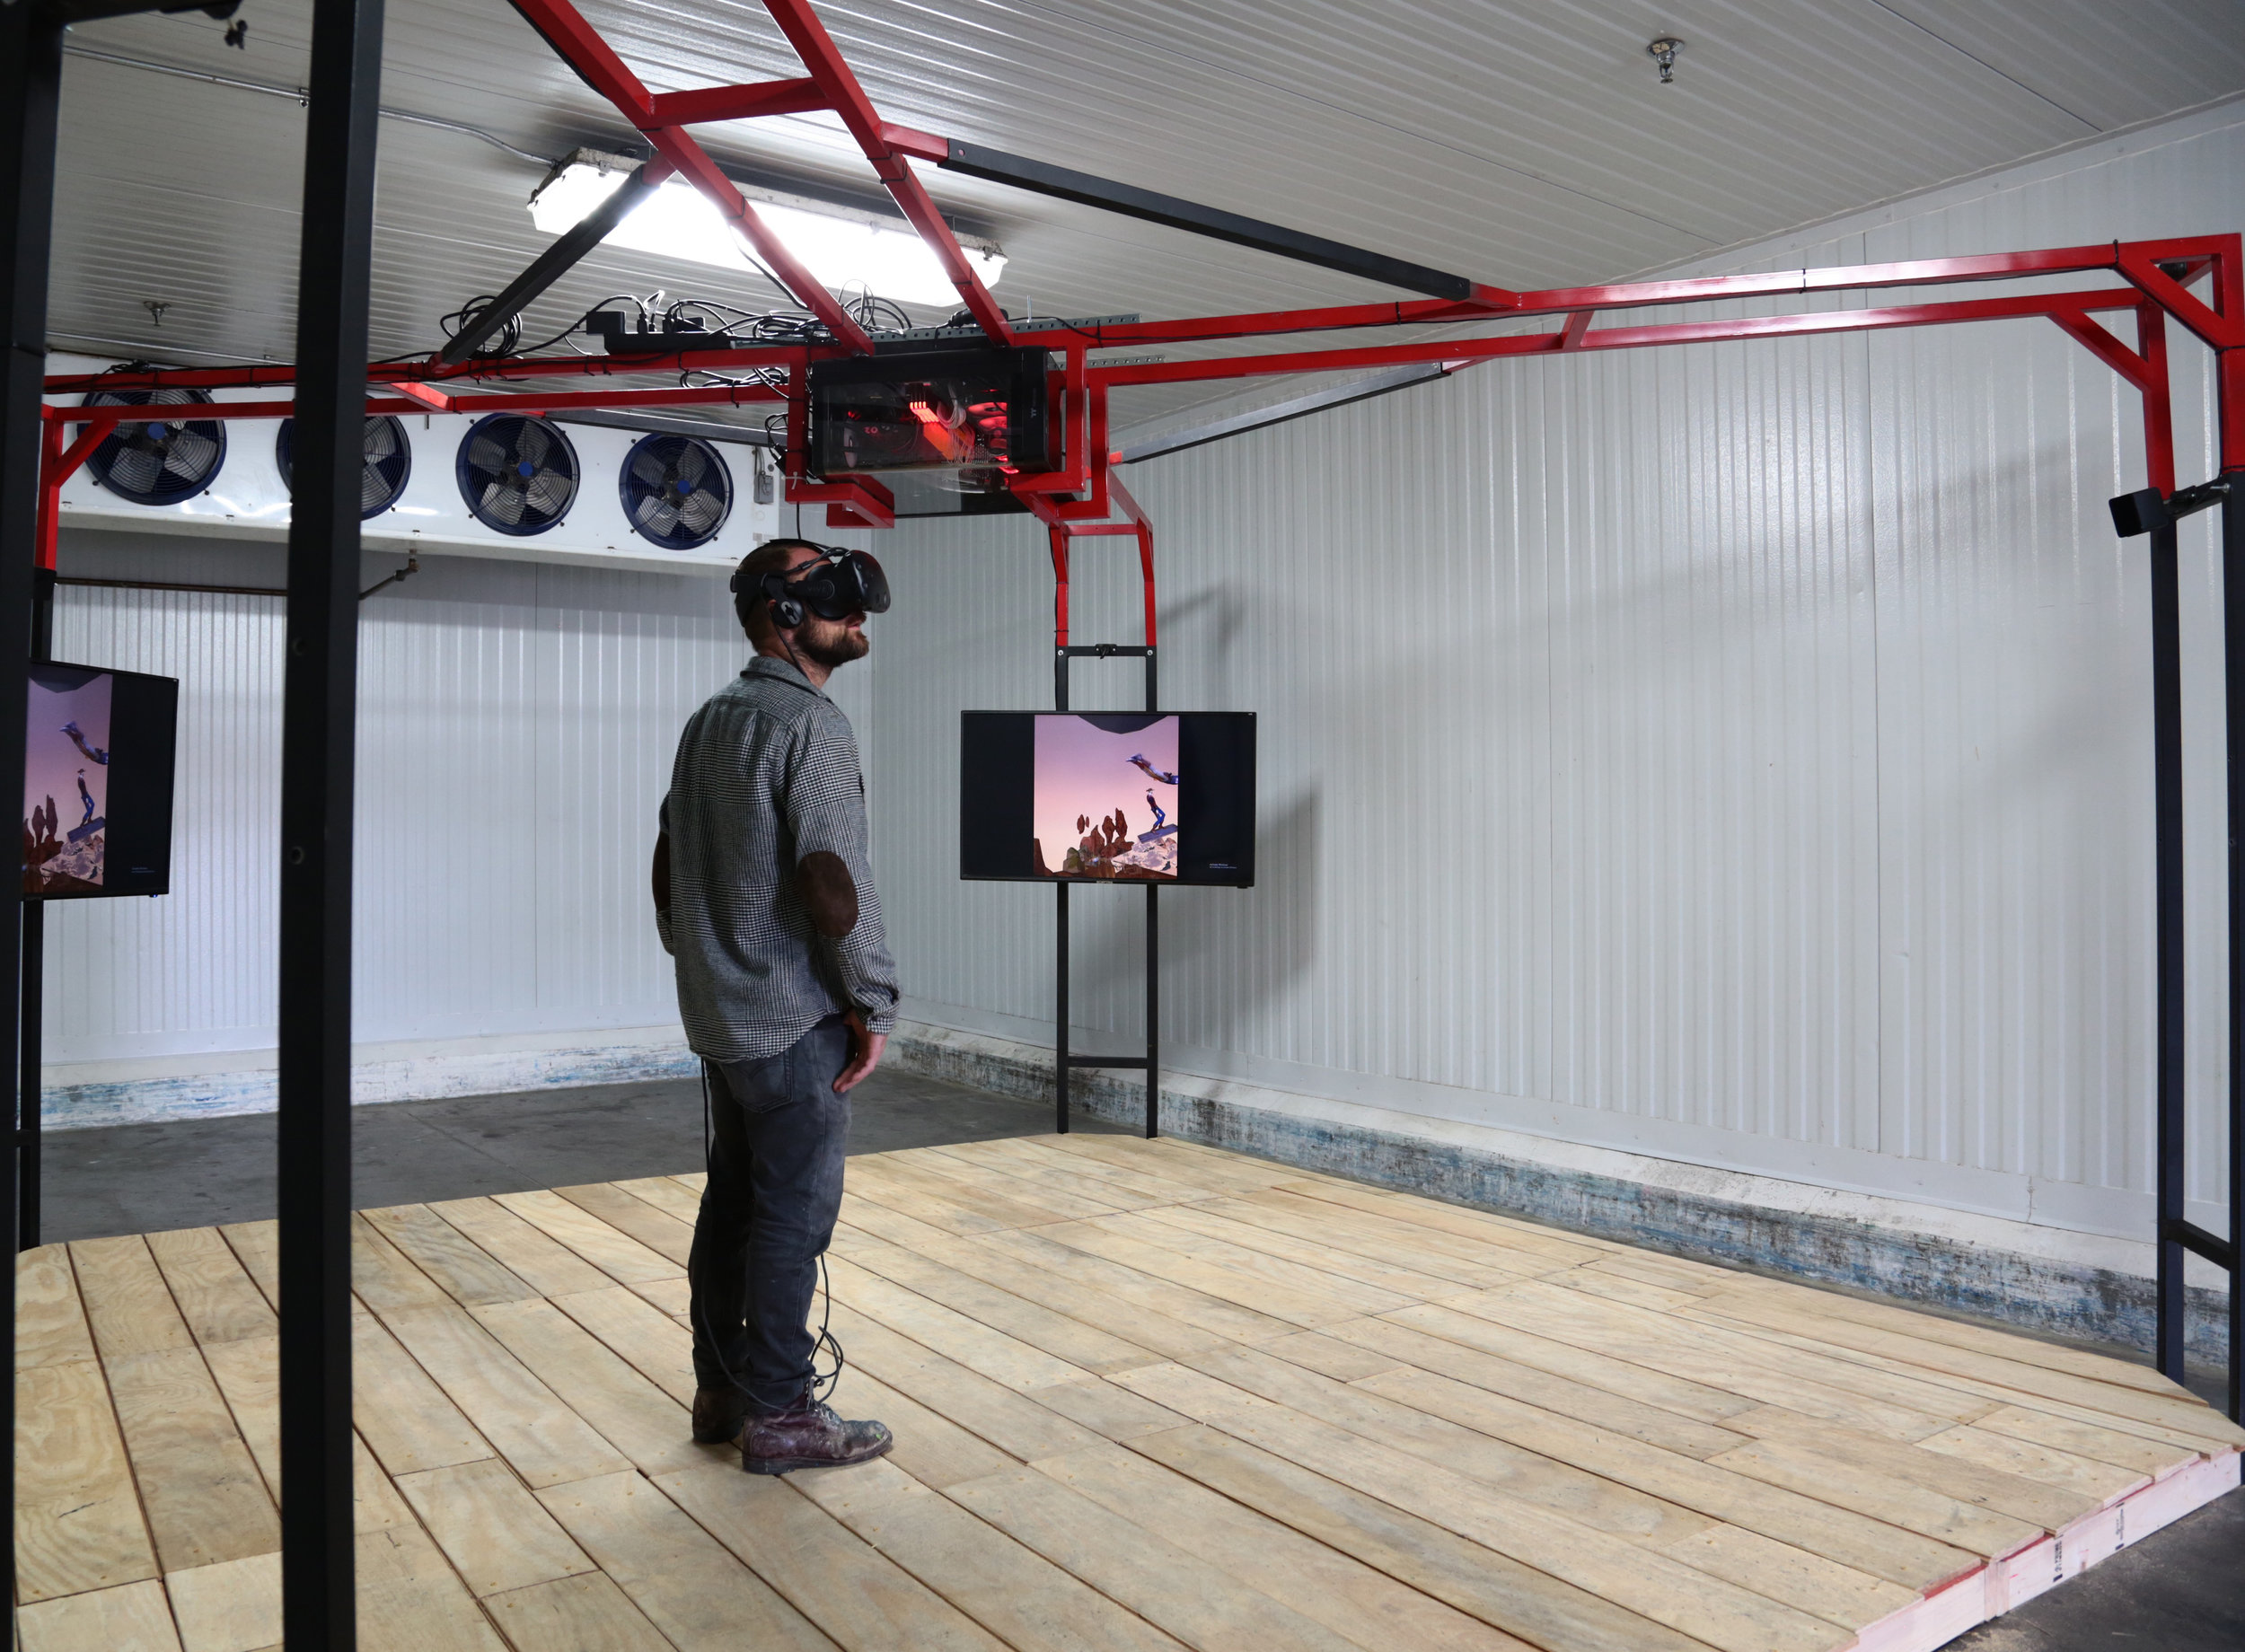  Installation view of Filip Kostic  Landgrab the Musical in Virtual Reality   SPRING/BREAK Art Show LA February 15-17, 2019   Link to press release  